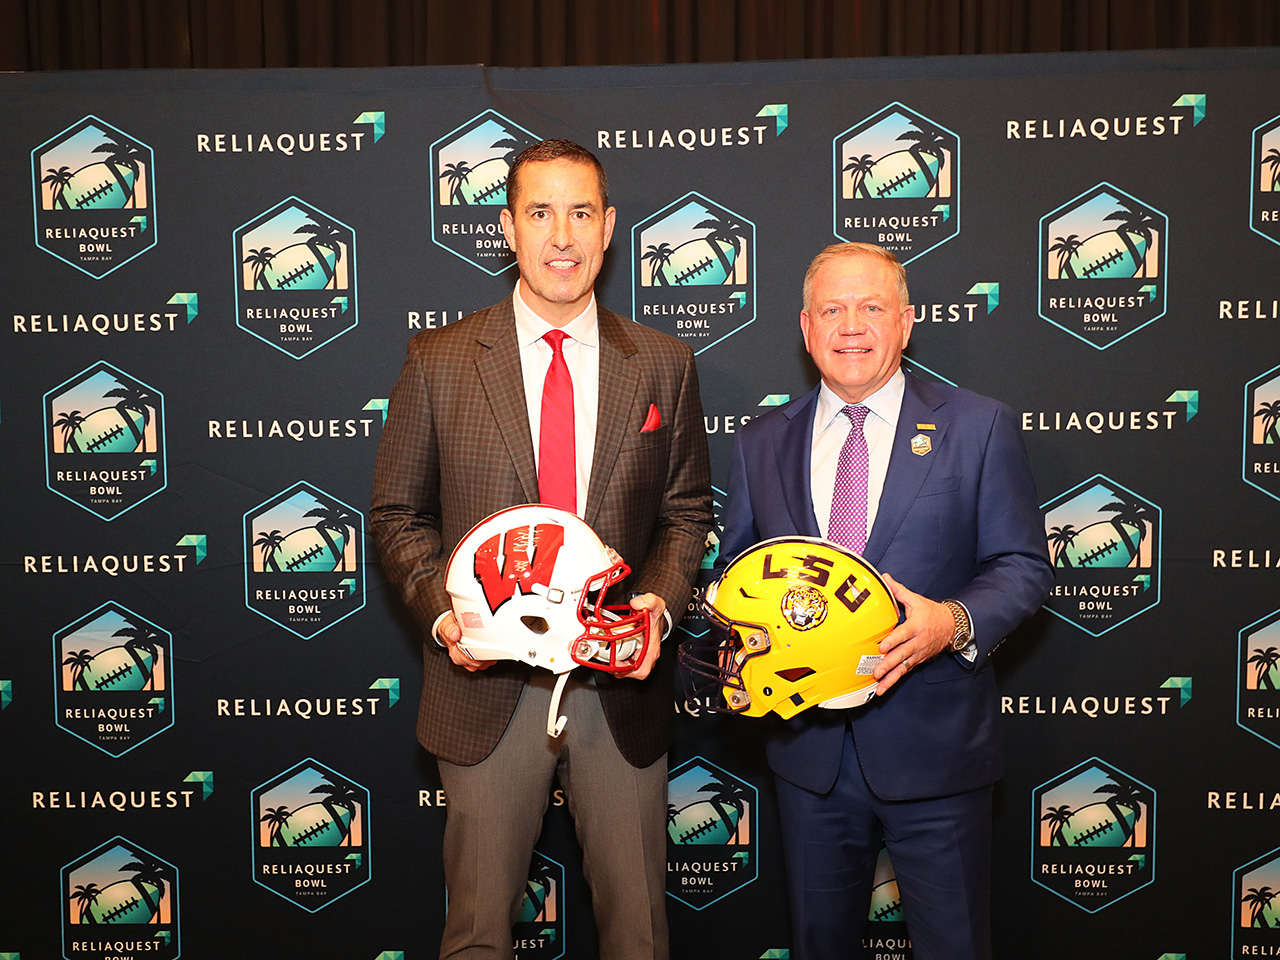 The Coaches pose with their helmets